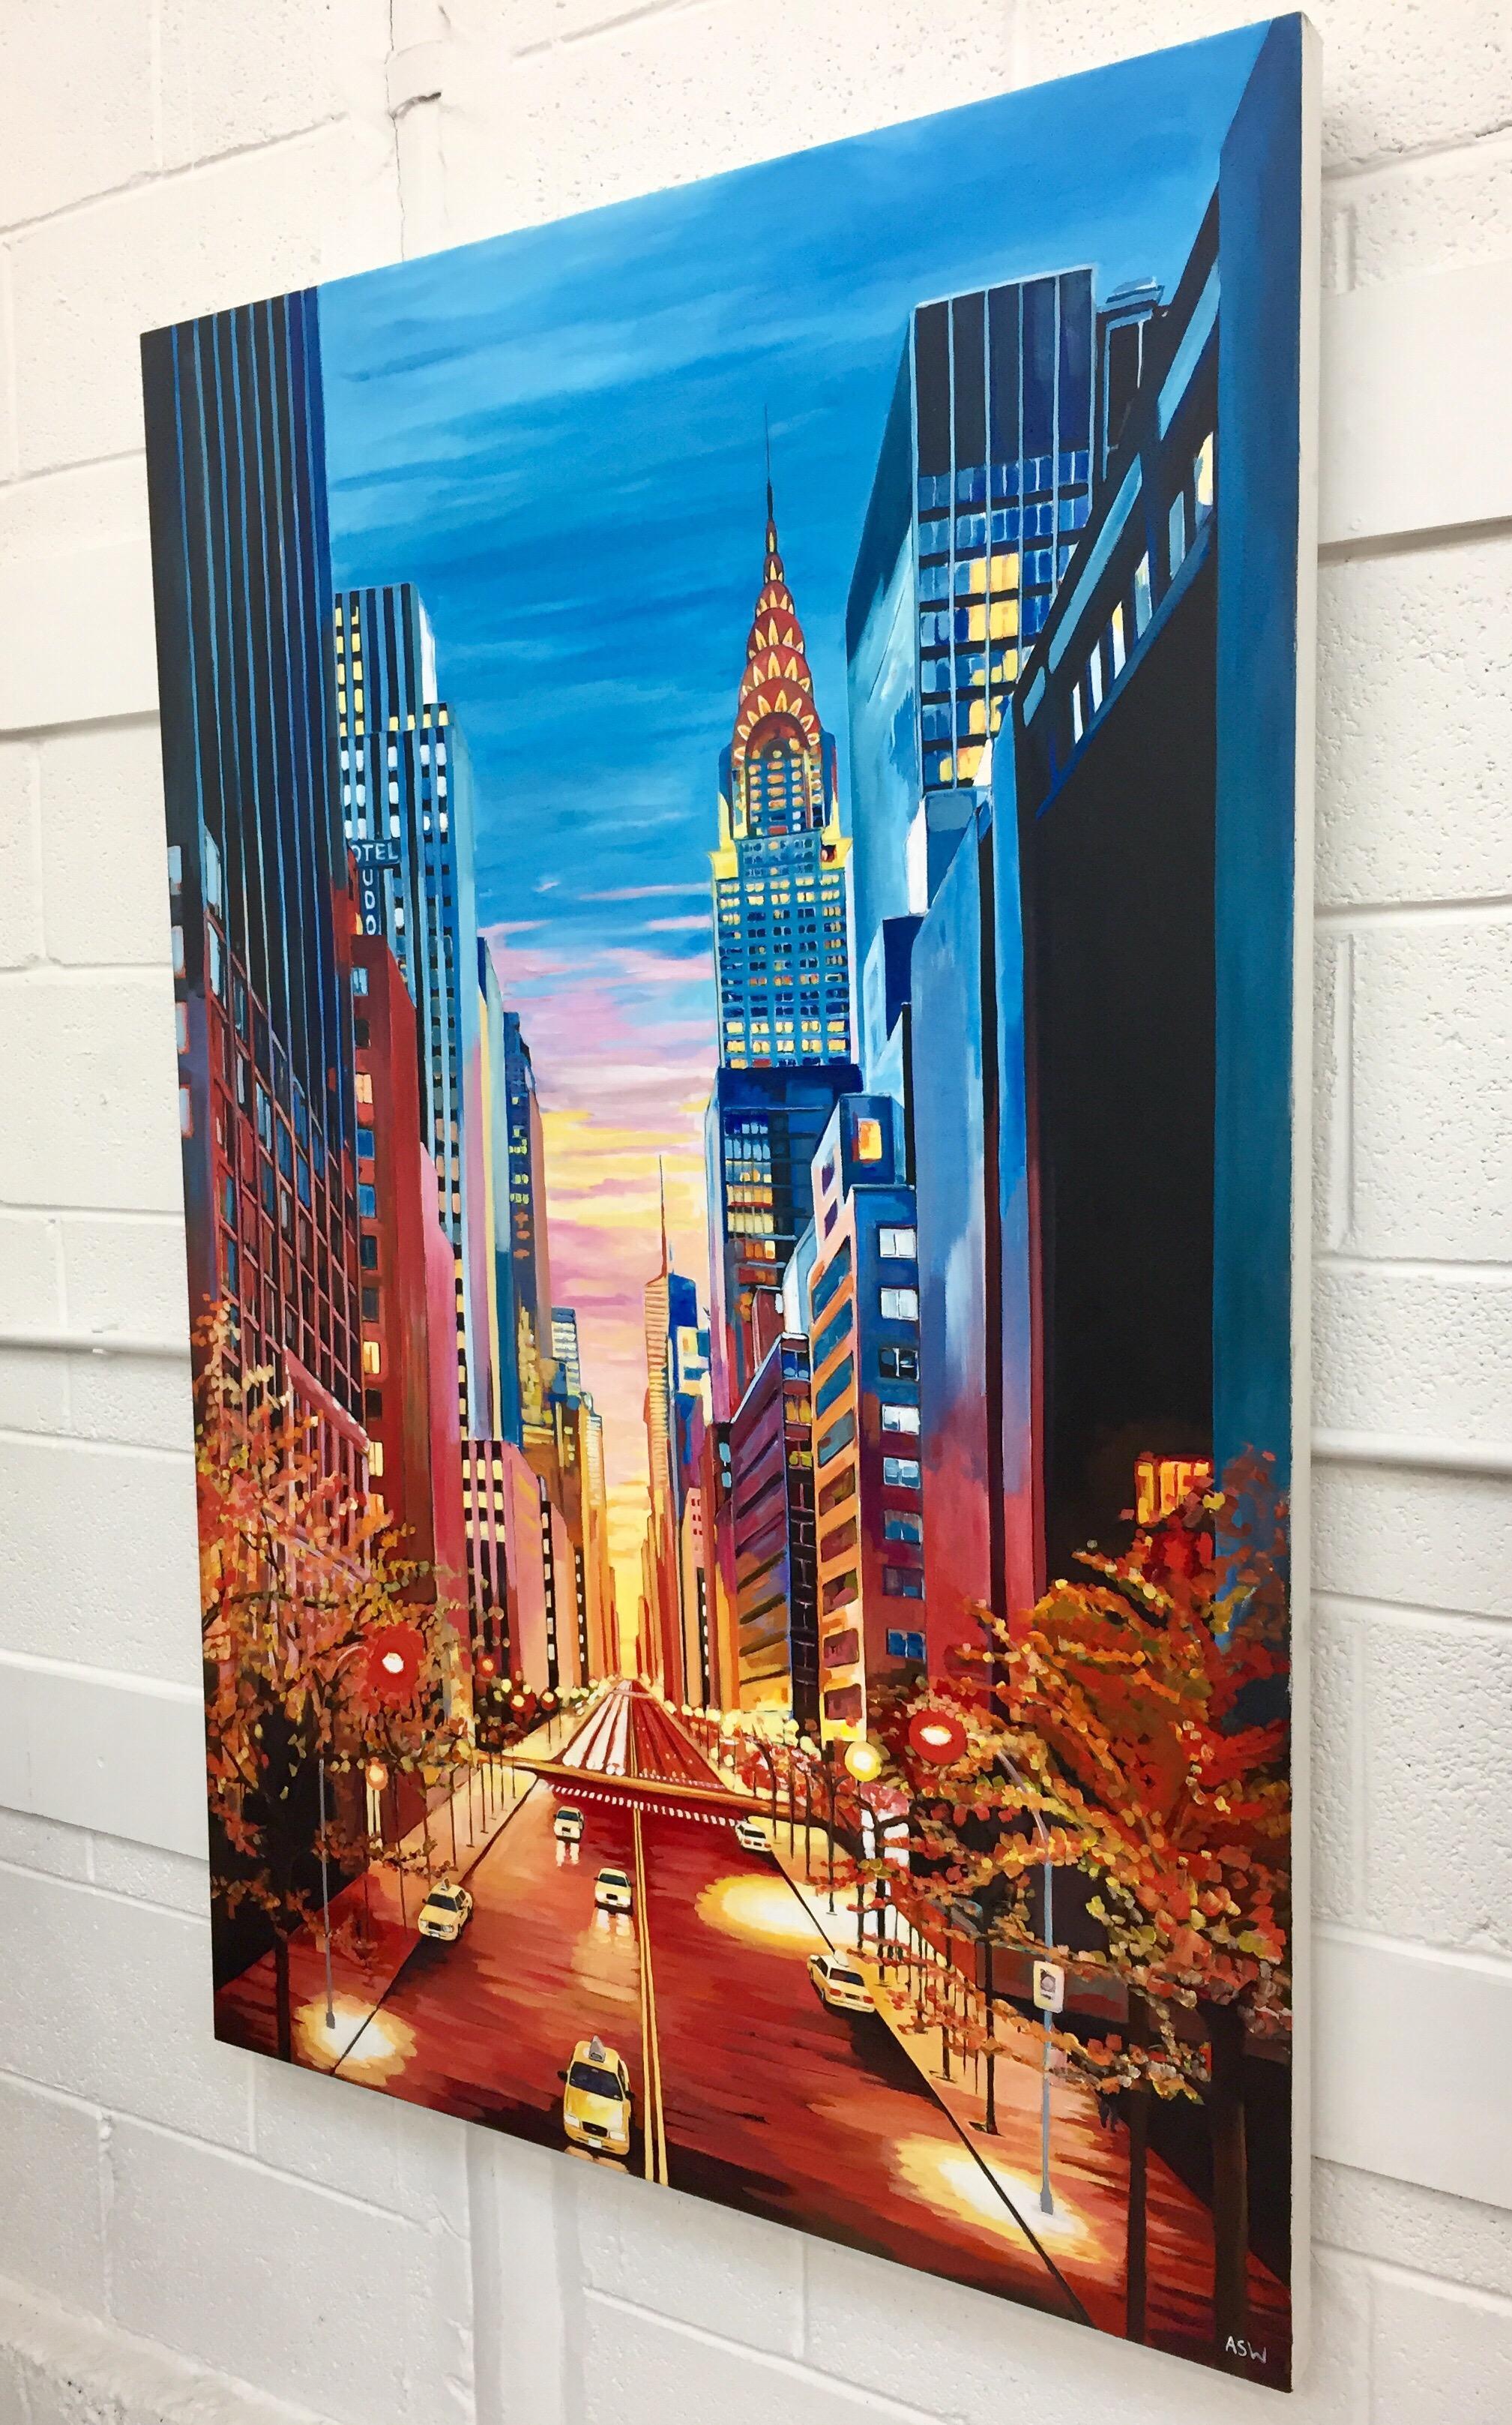 Large Painting of Chrysler Building New York City NYC by Leading British Artist 1